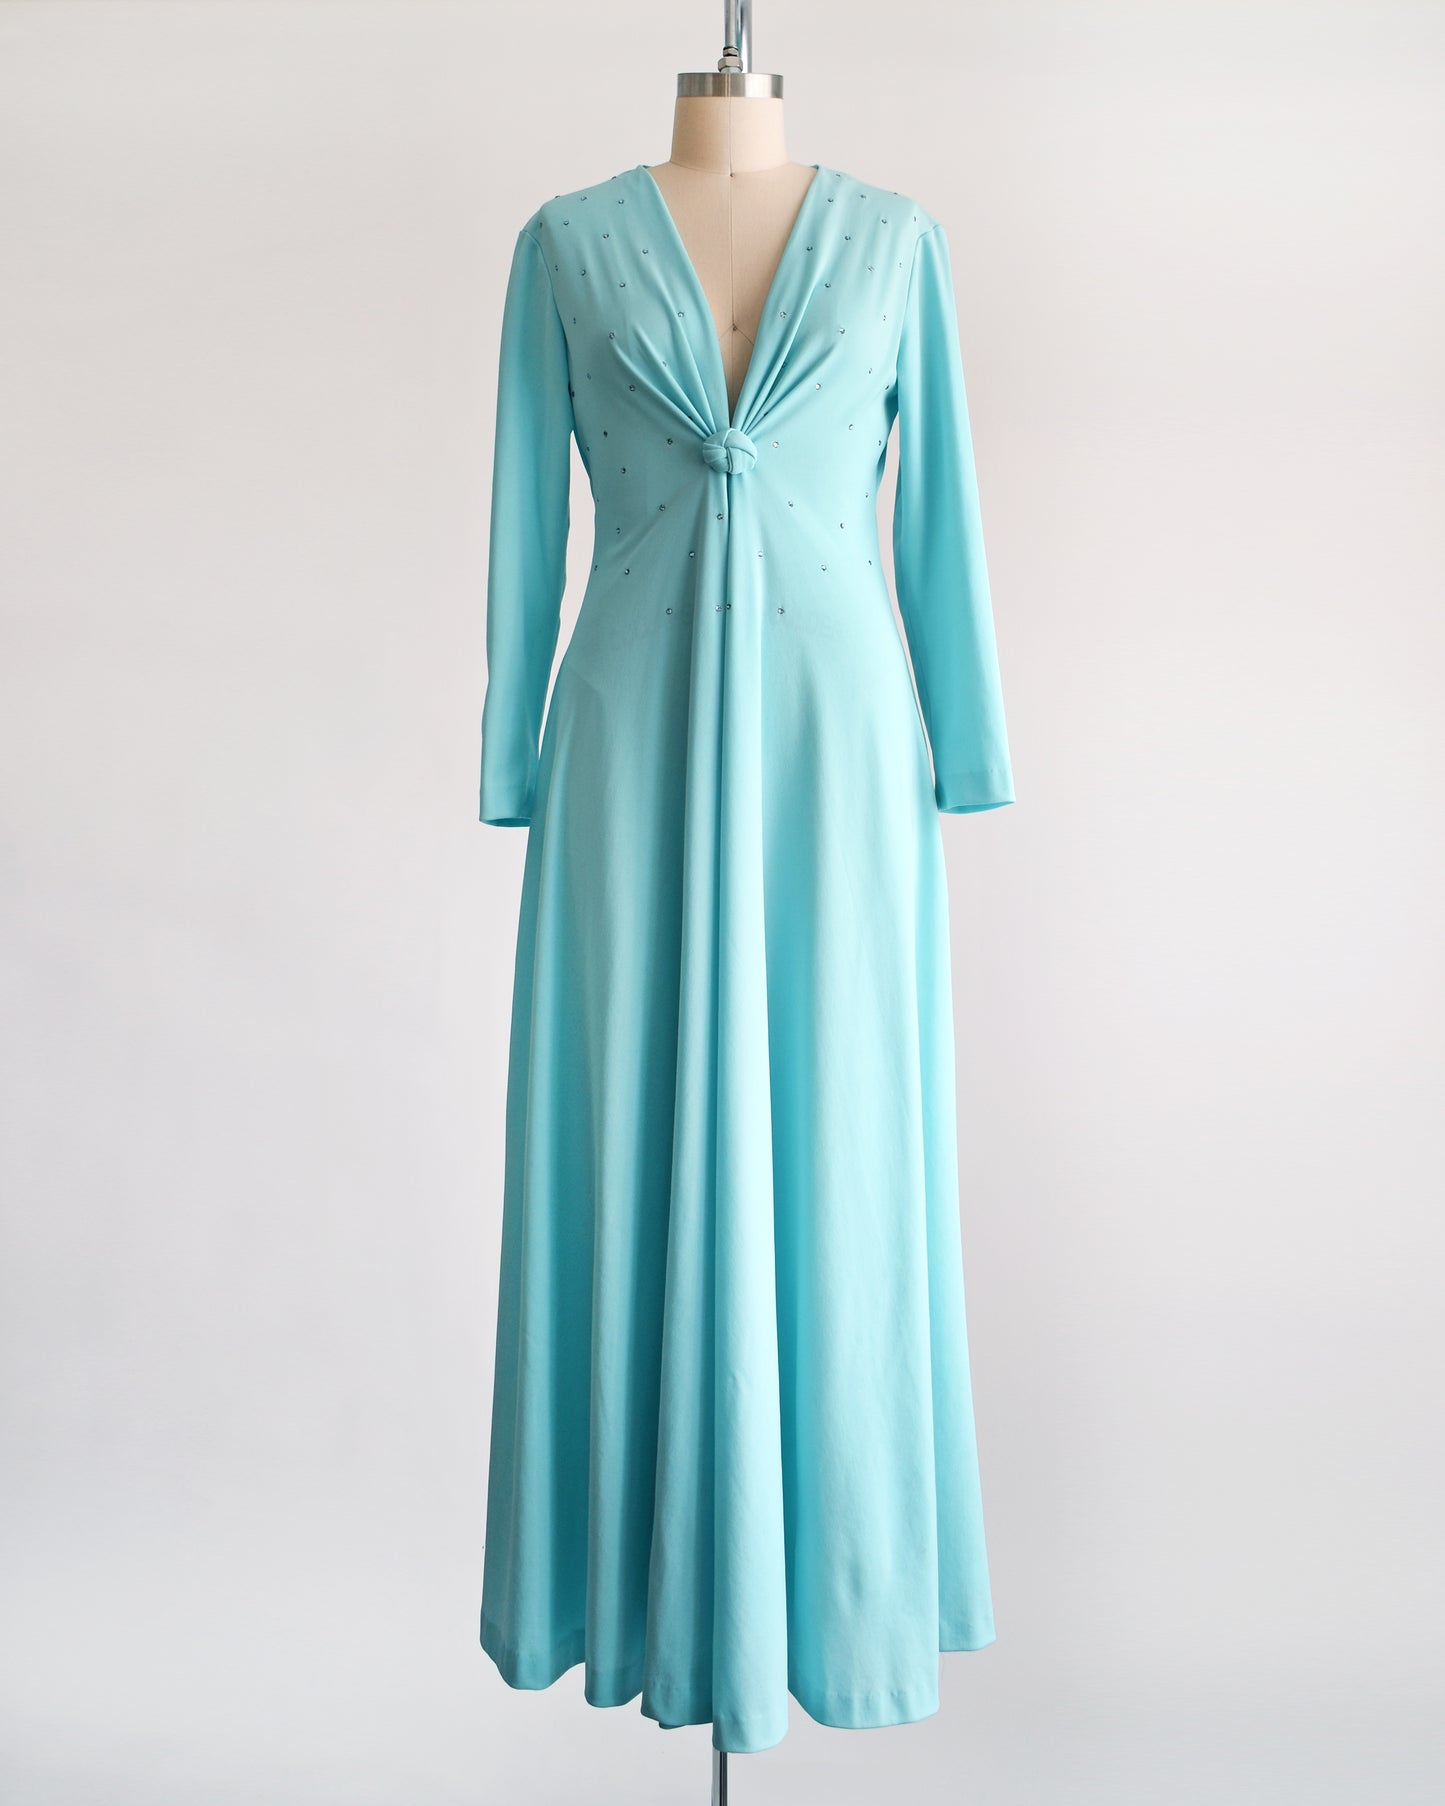 a vintage 1970s light blue maxi dress that has rhinestones on the bodice, a plunging v-neckline, and long sleeves